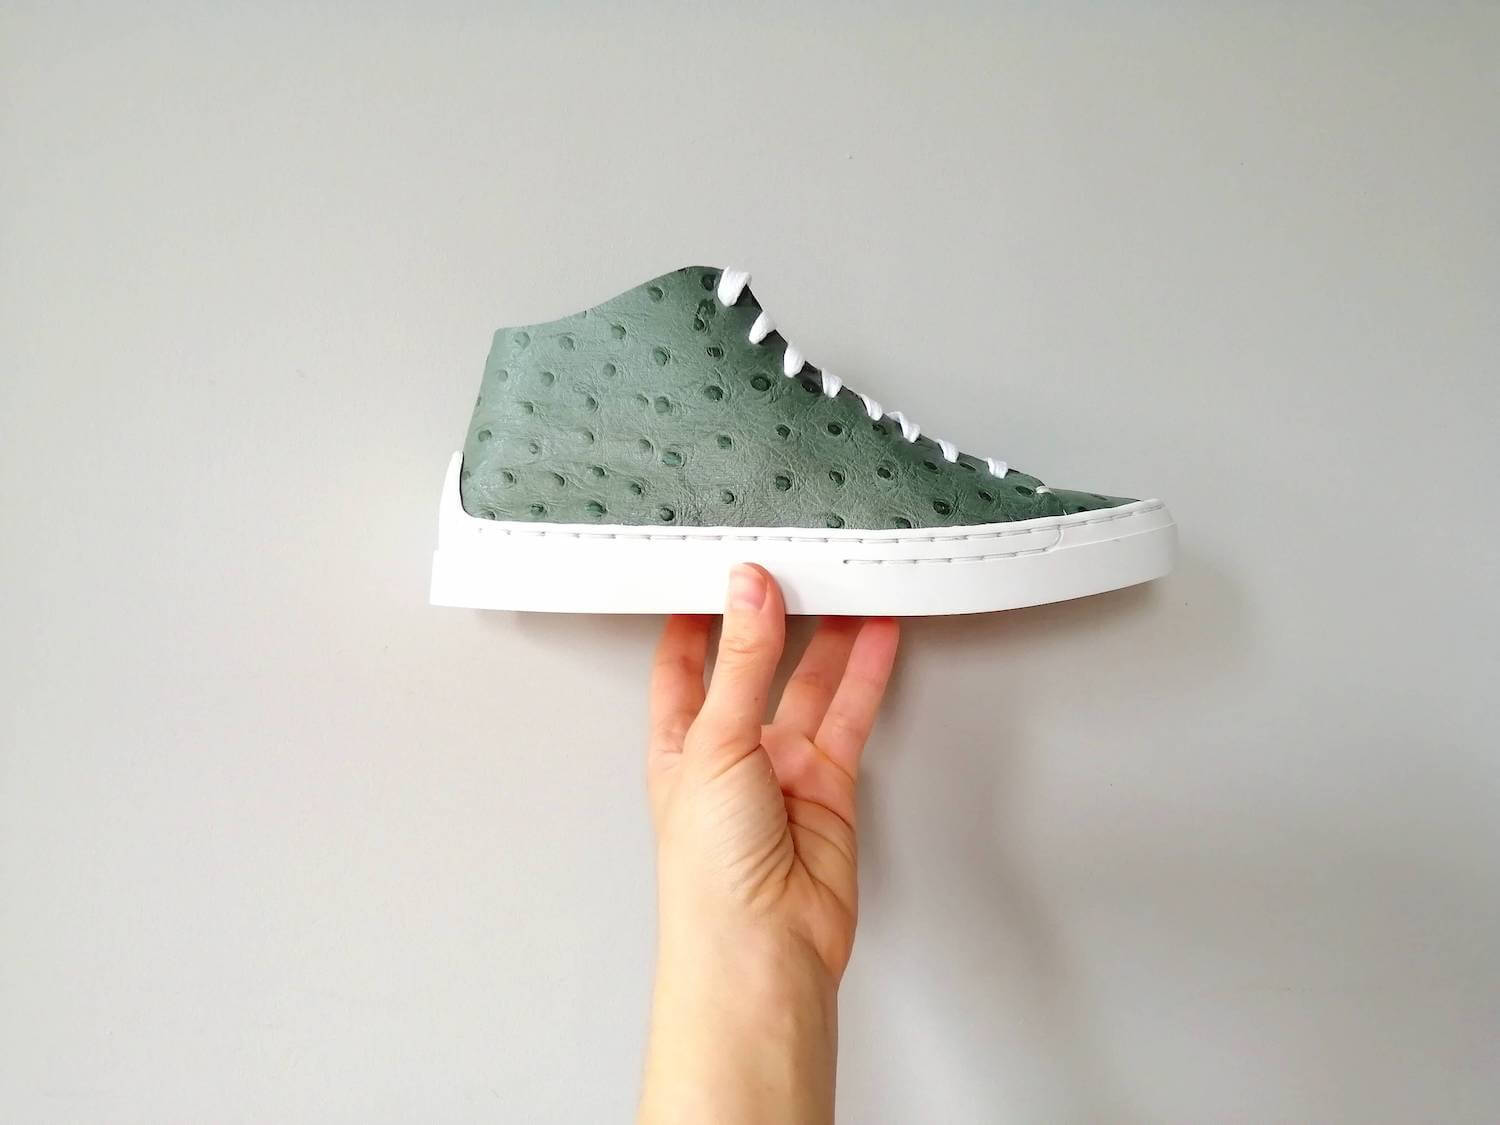 Make Own Sneakers in a Day Workshop – Needle Thread